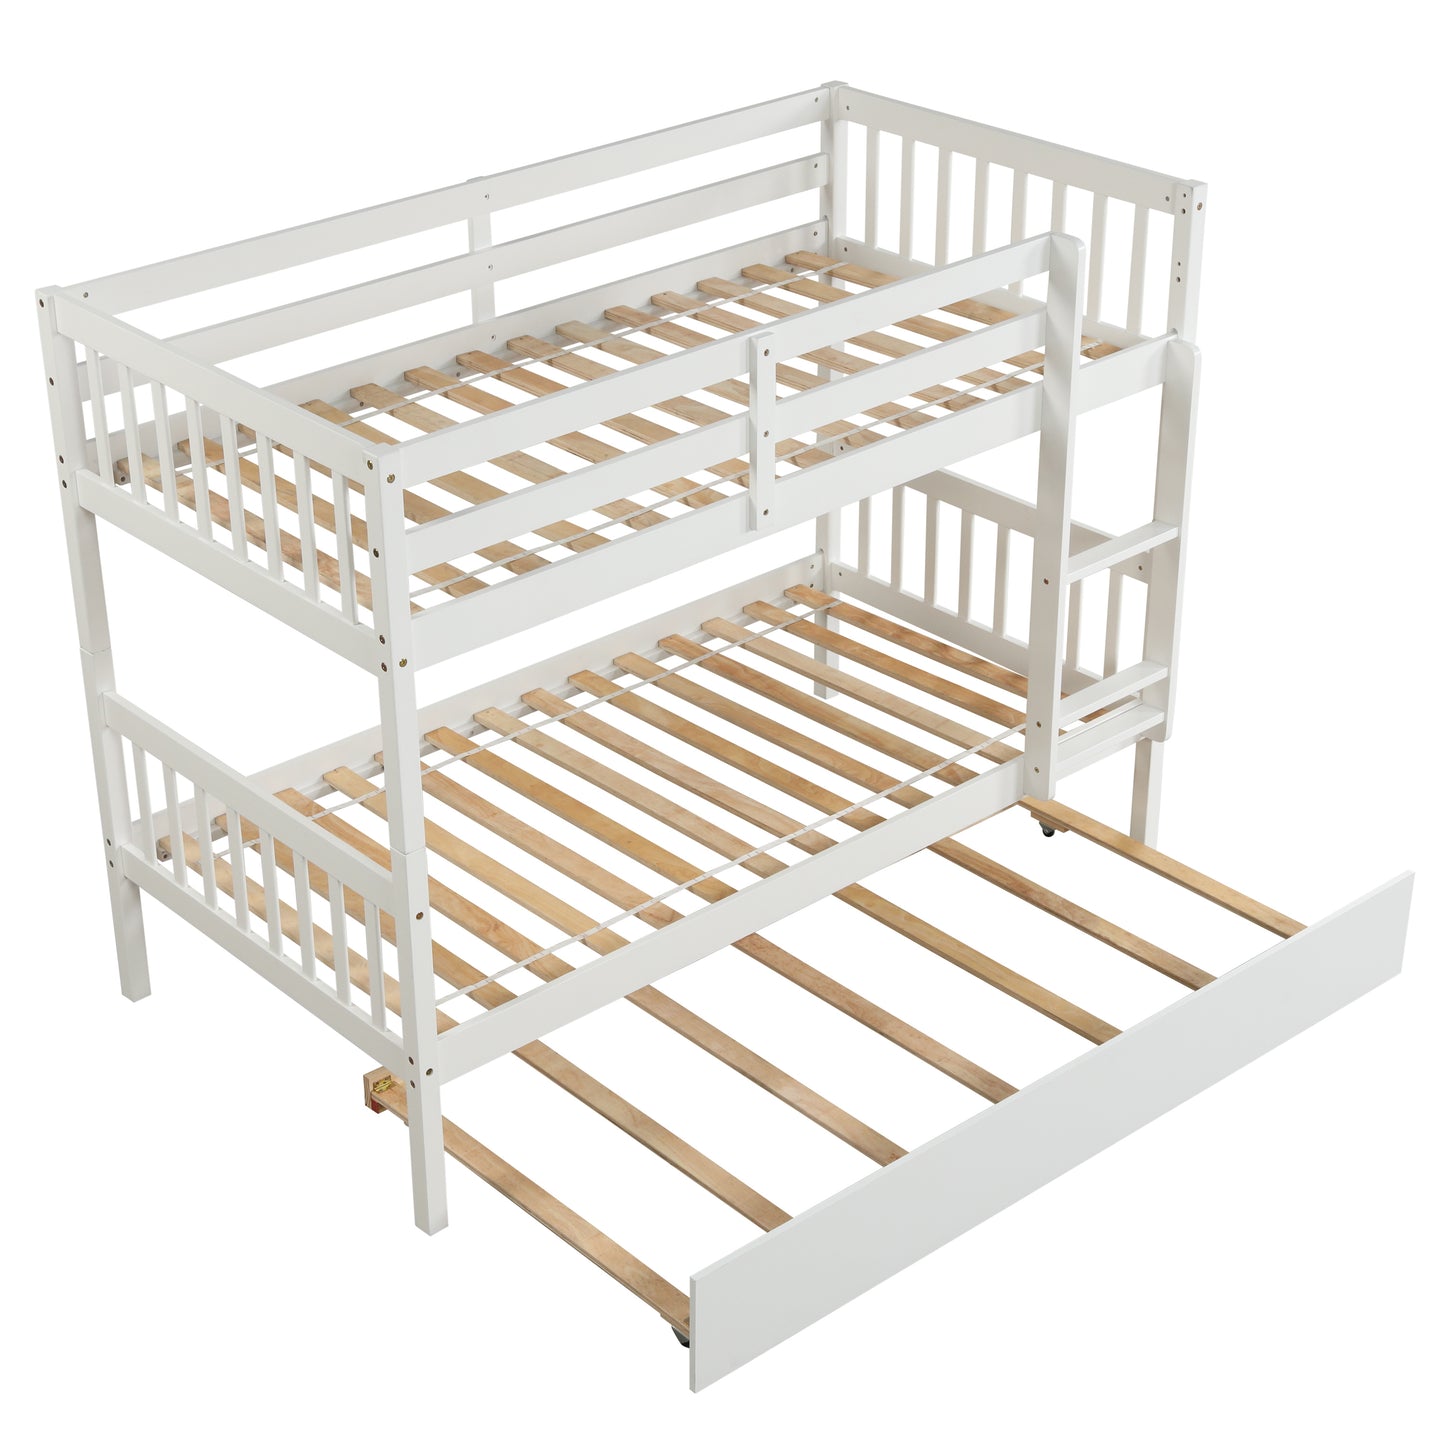 Twin Over Twin Bunk Beds with Trundle, Solid Wood Trundle Bed Frame with Safety Rail and Ladder, Kids/Teens Bedroom, Guest Room Furniture, Can Be converted into 2 Beds, White